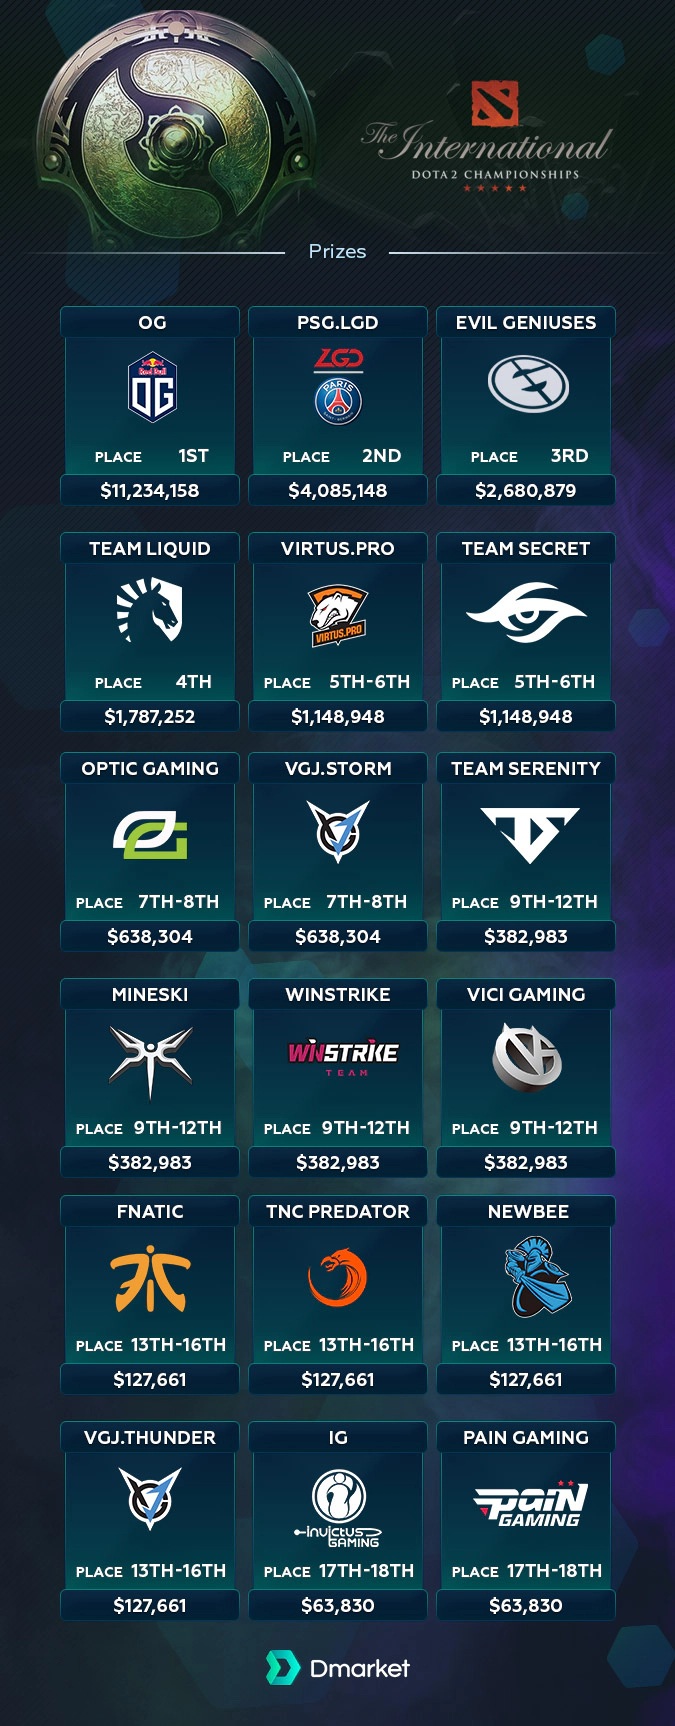 Prize Pool of the international 2018